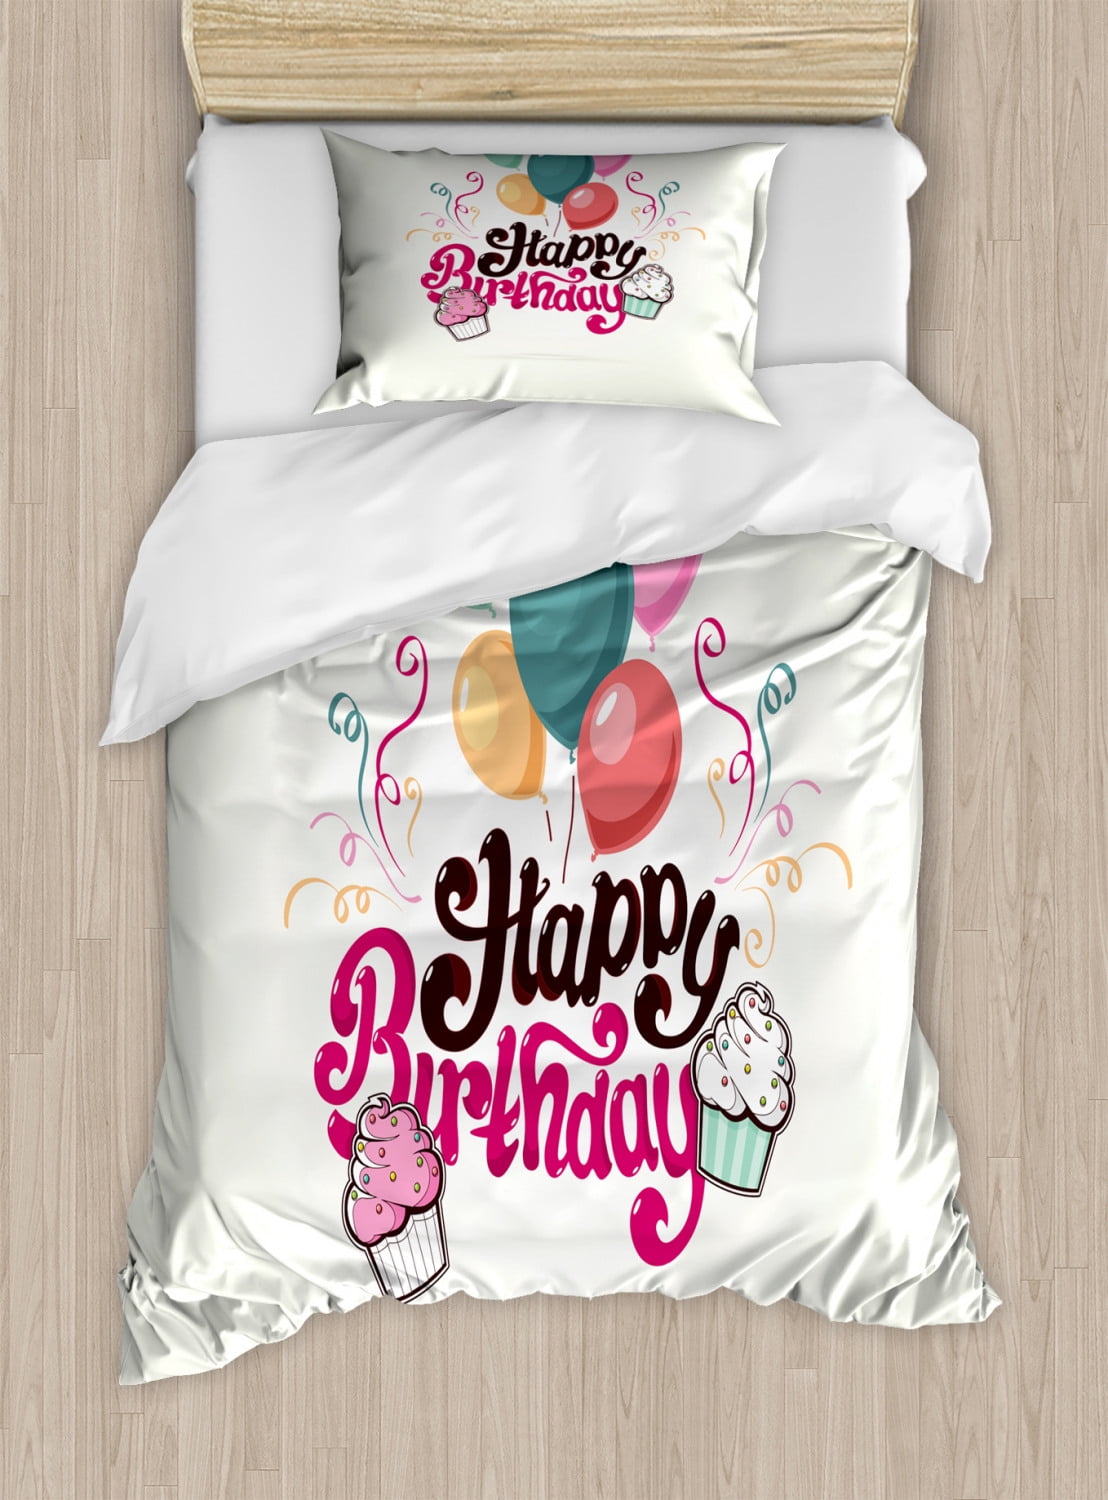 Cupcake Duvet Cover Set Twin Size Happy Birthday Typography With